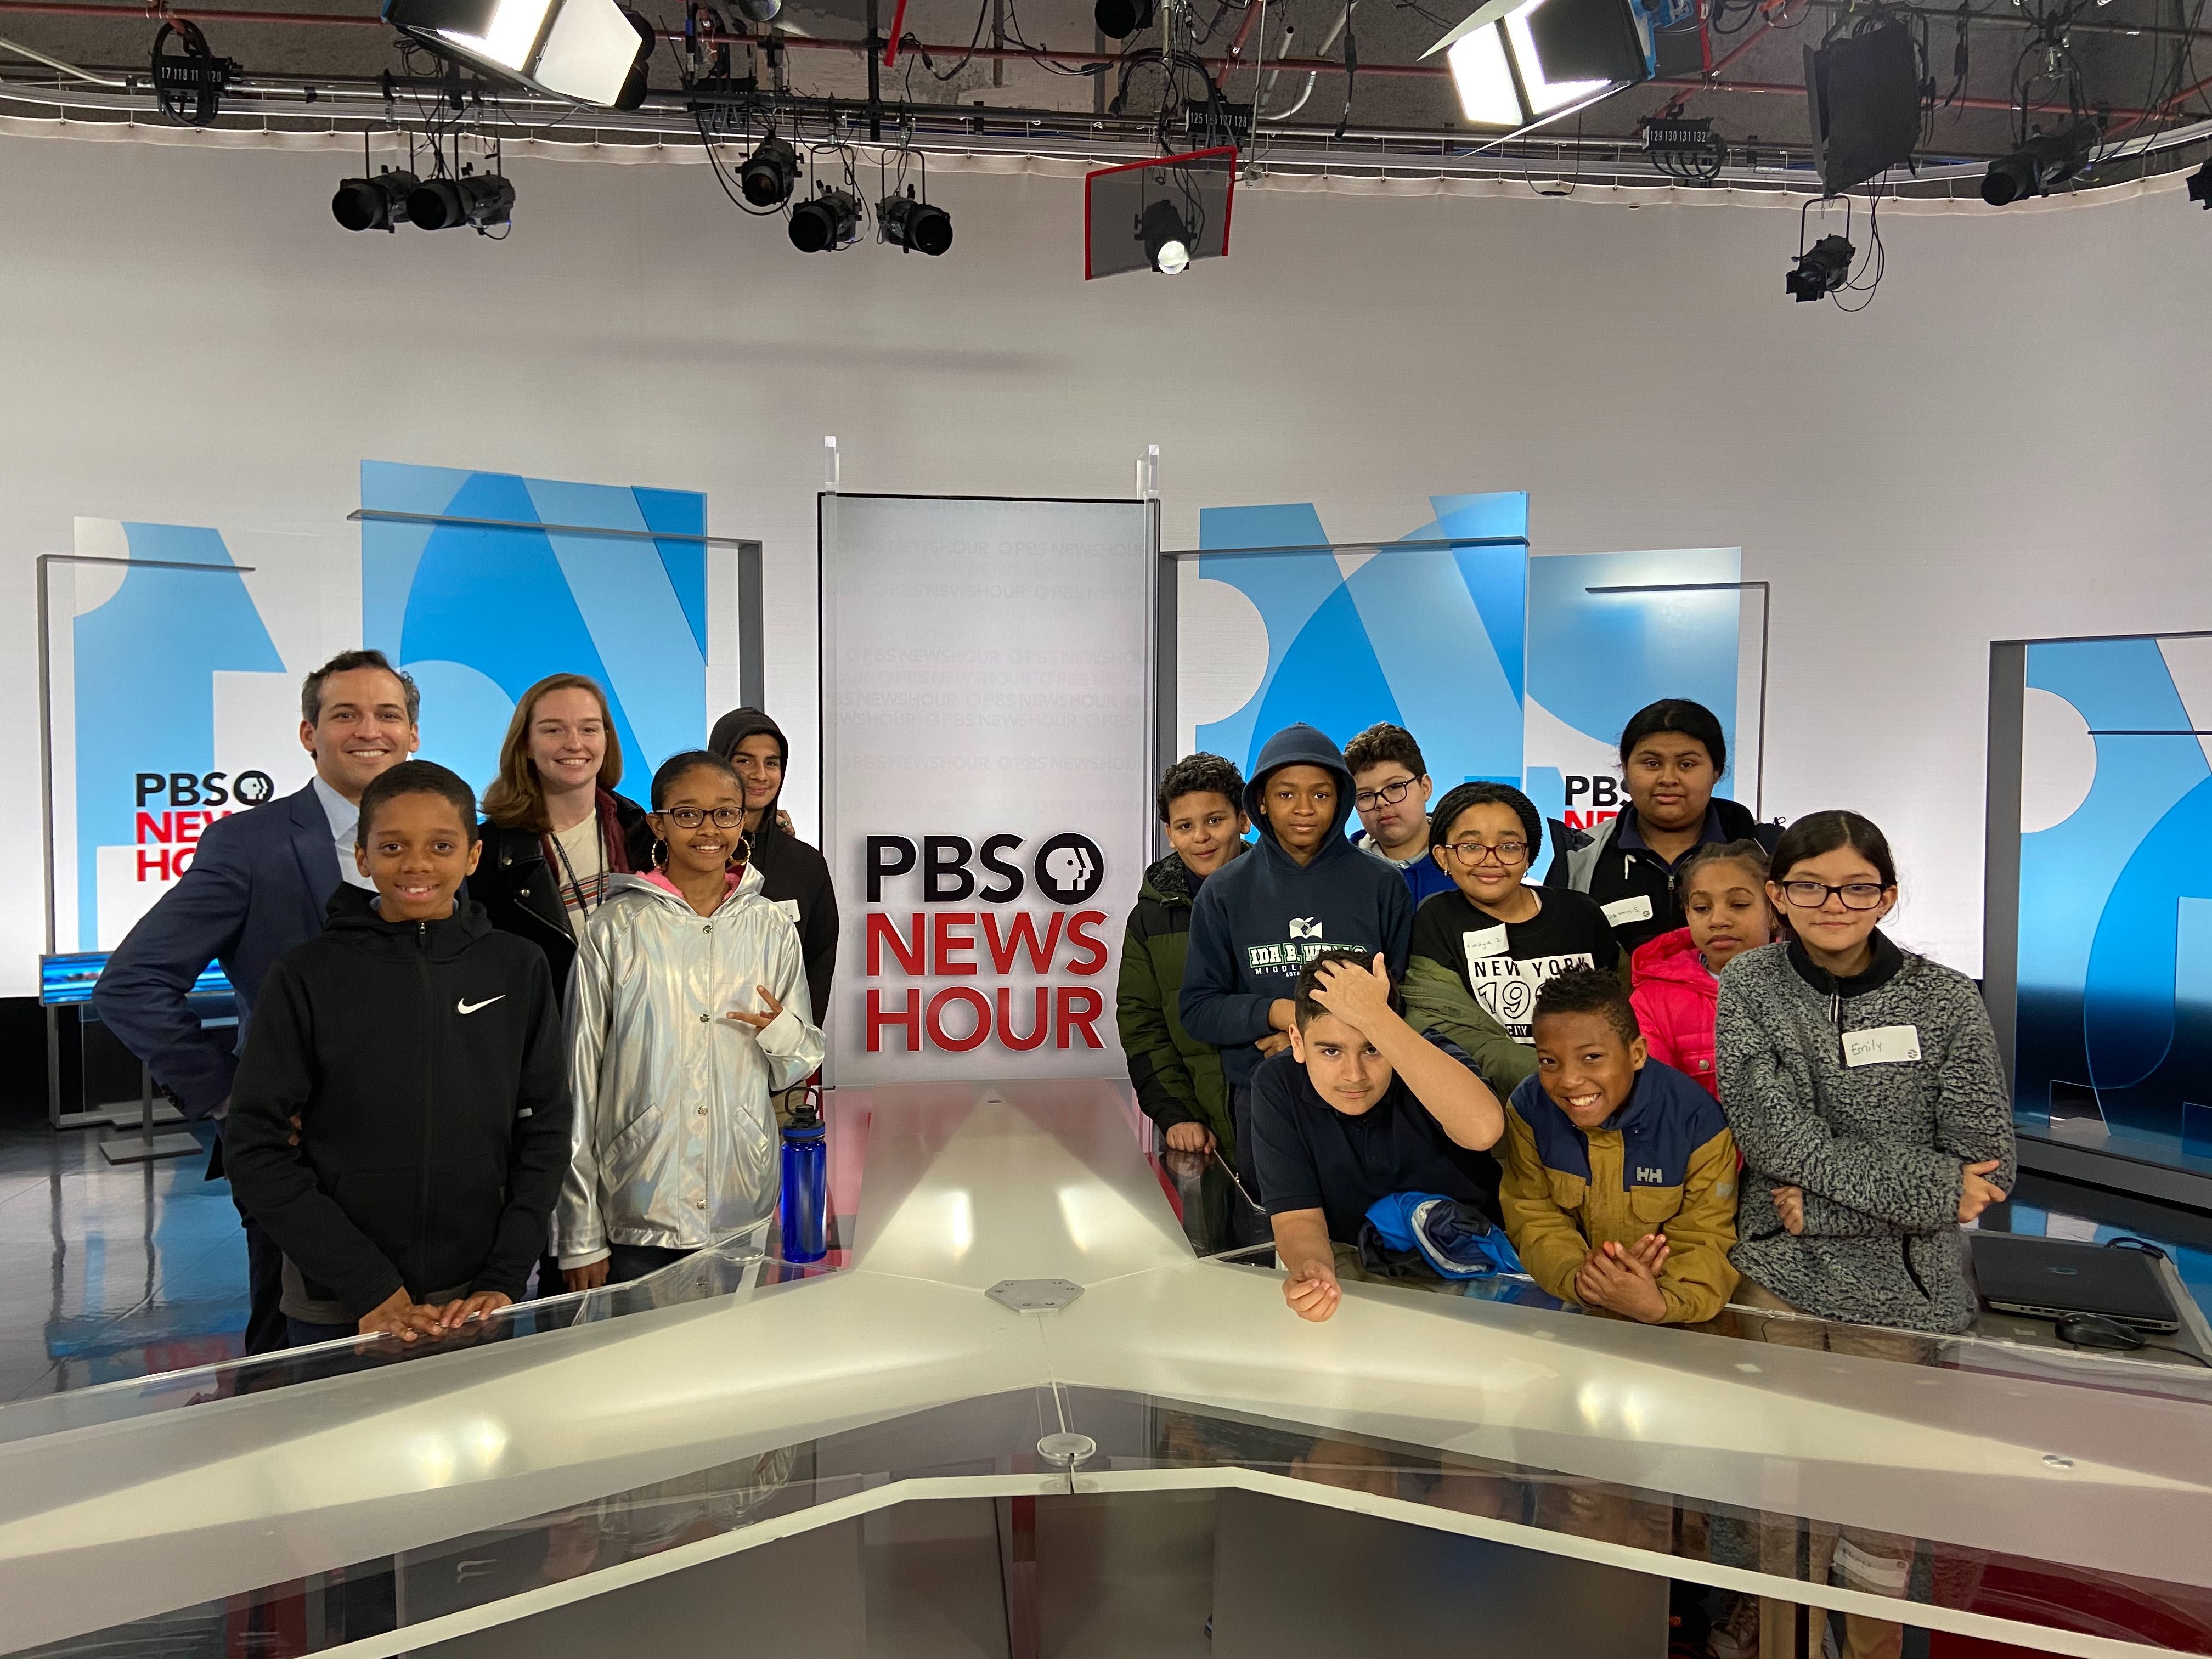 Ida B. Wells Middle School students tour the PBS NewsHour studio with special correspondent Nick Schifrin. Image by Pauline Werner. United States, 2020.